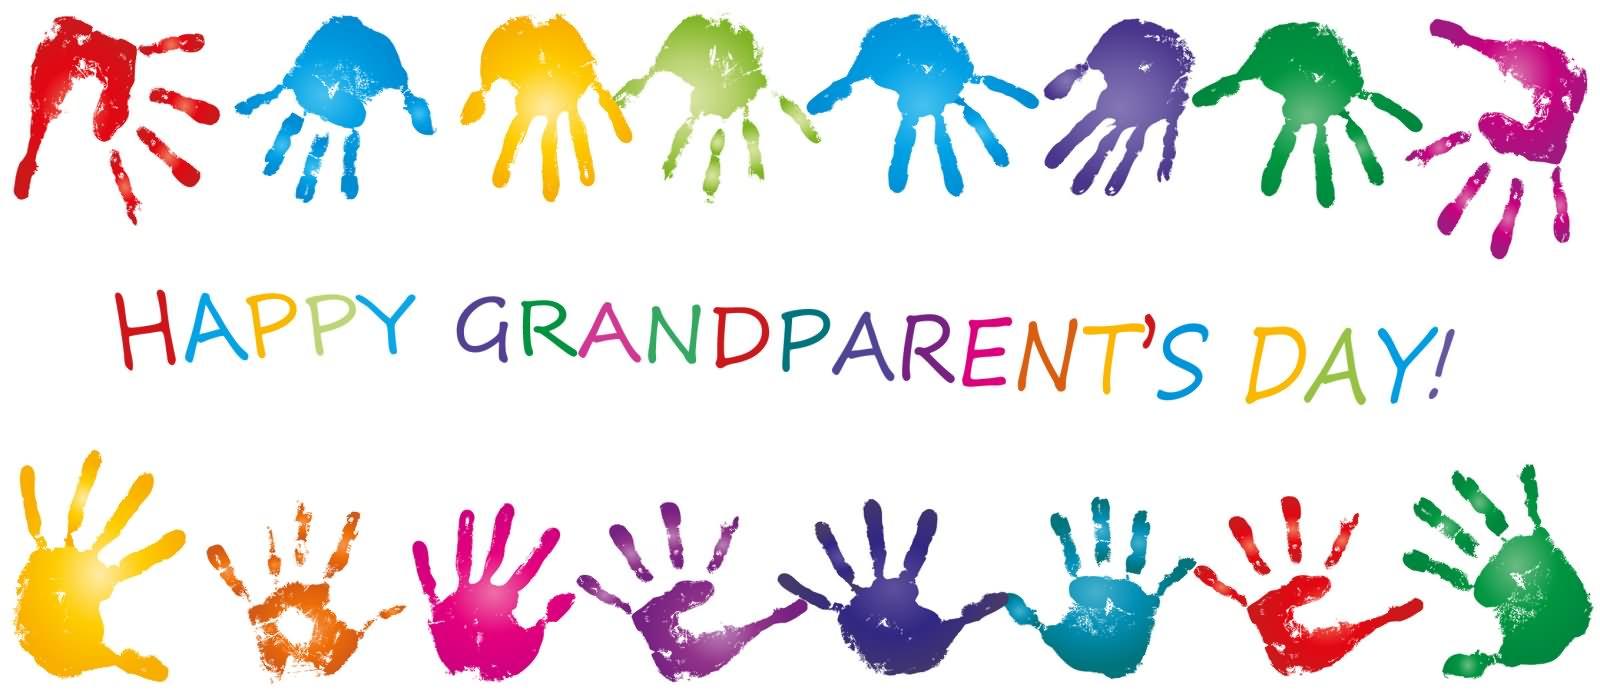 Grandparents Day 2019 Wallpapers - Wallpaper Cave